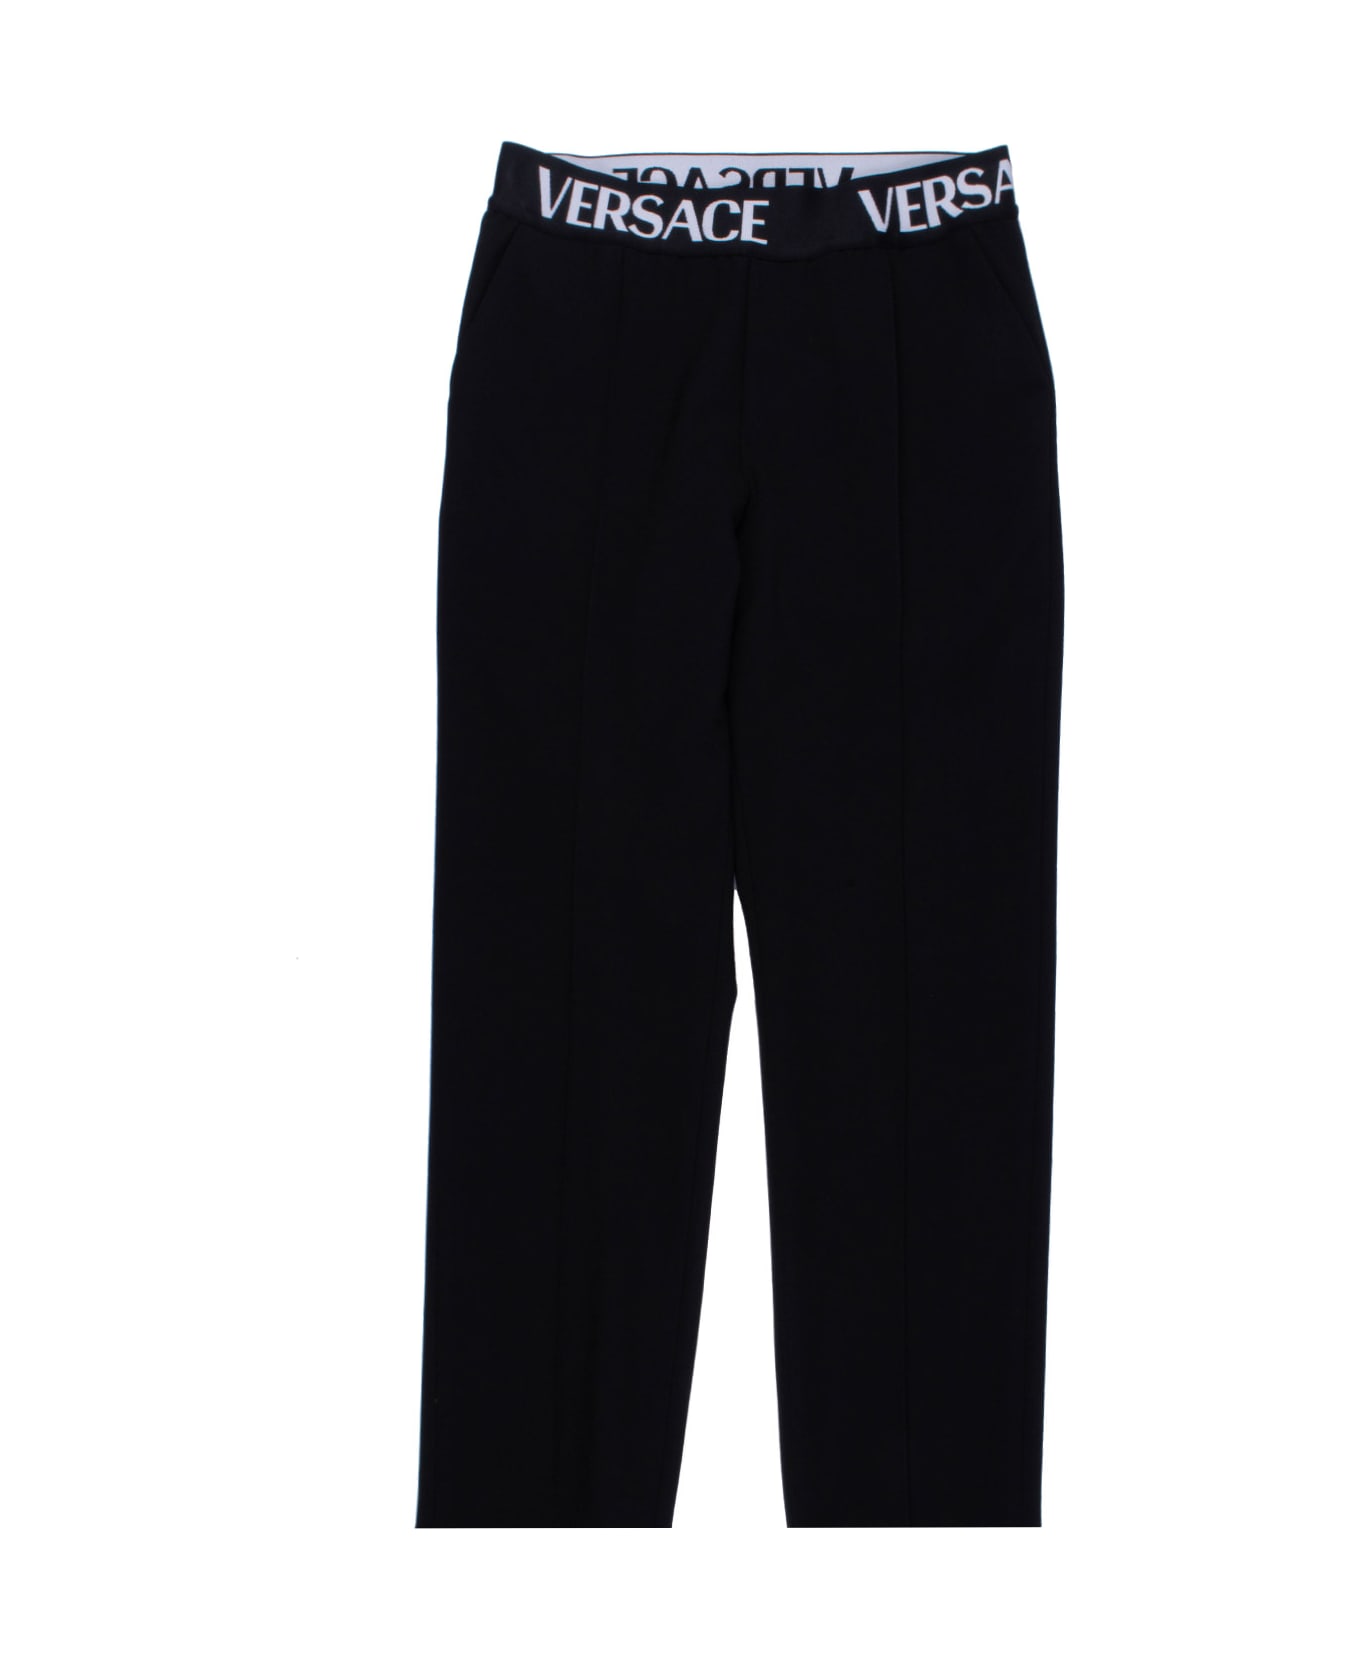 Versace Sporty Trousers With Versace Logo - Back ボトムス